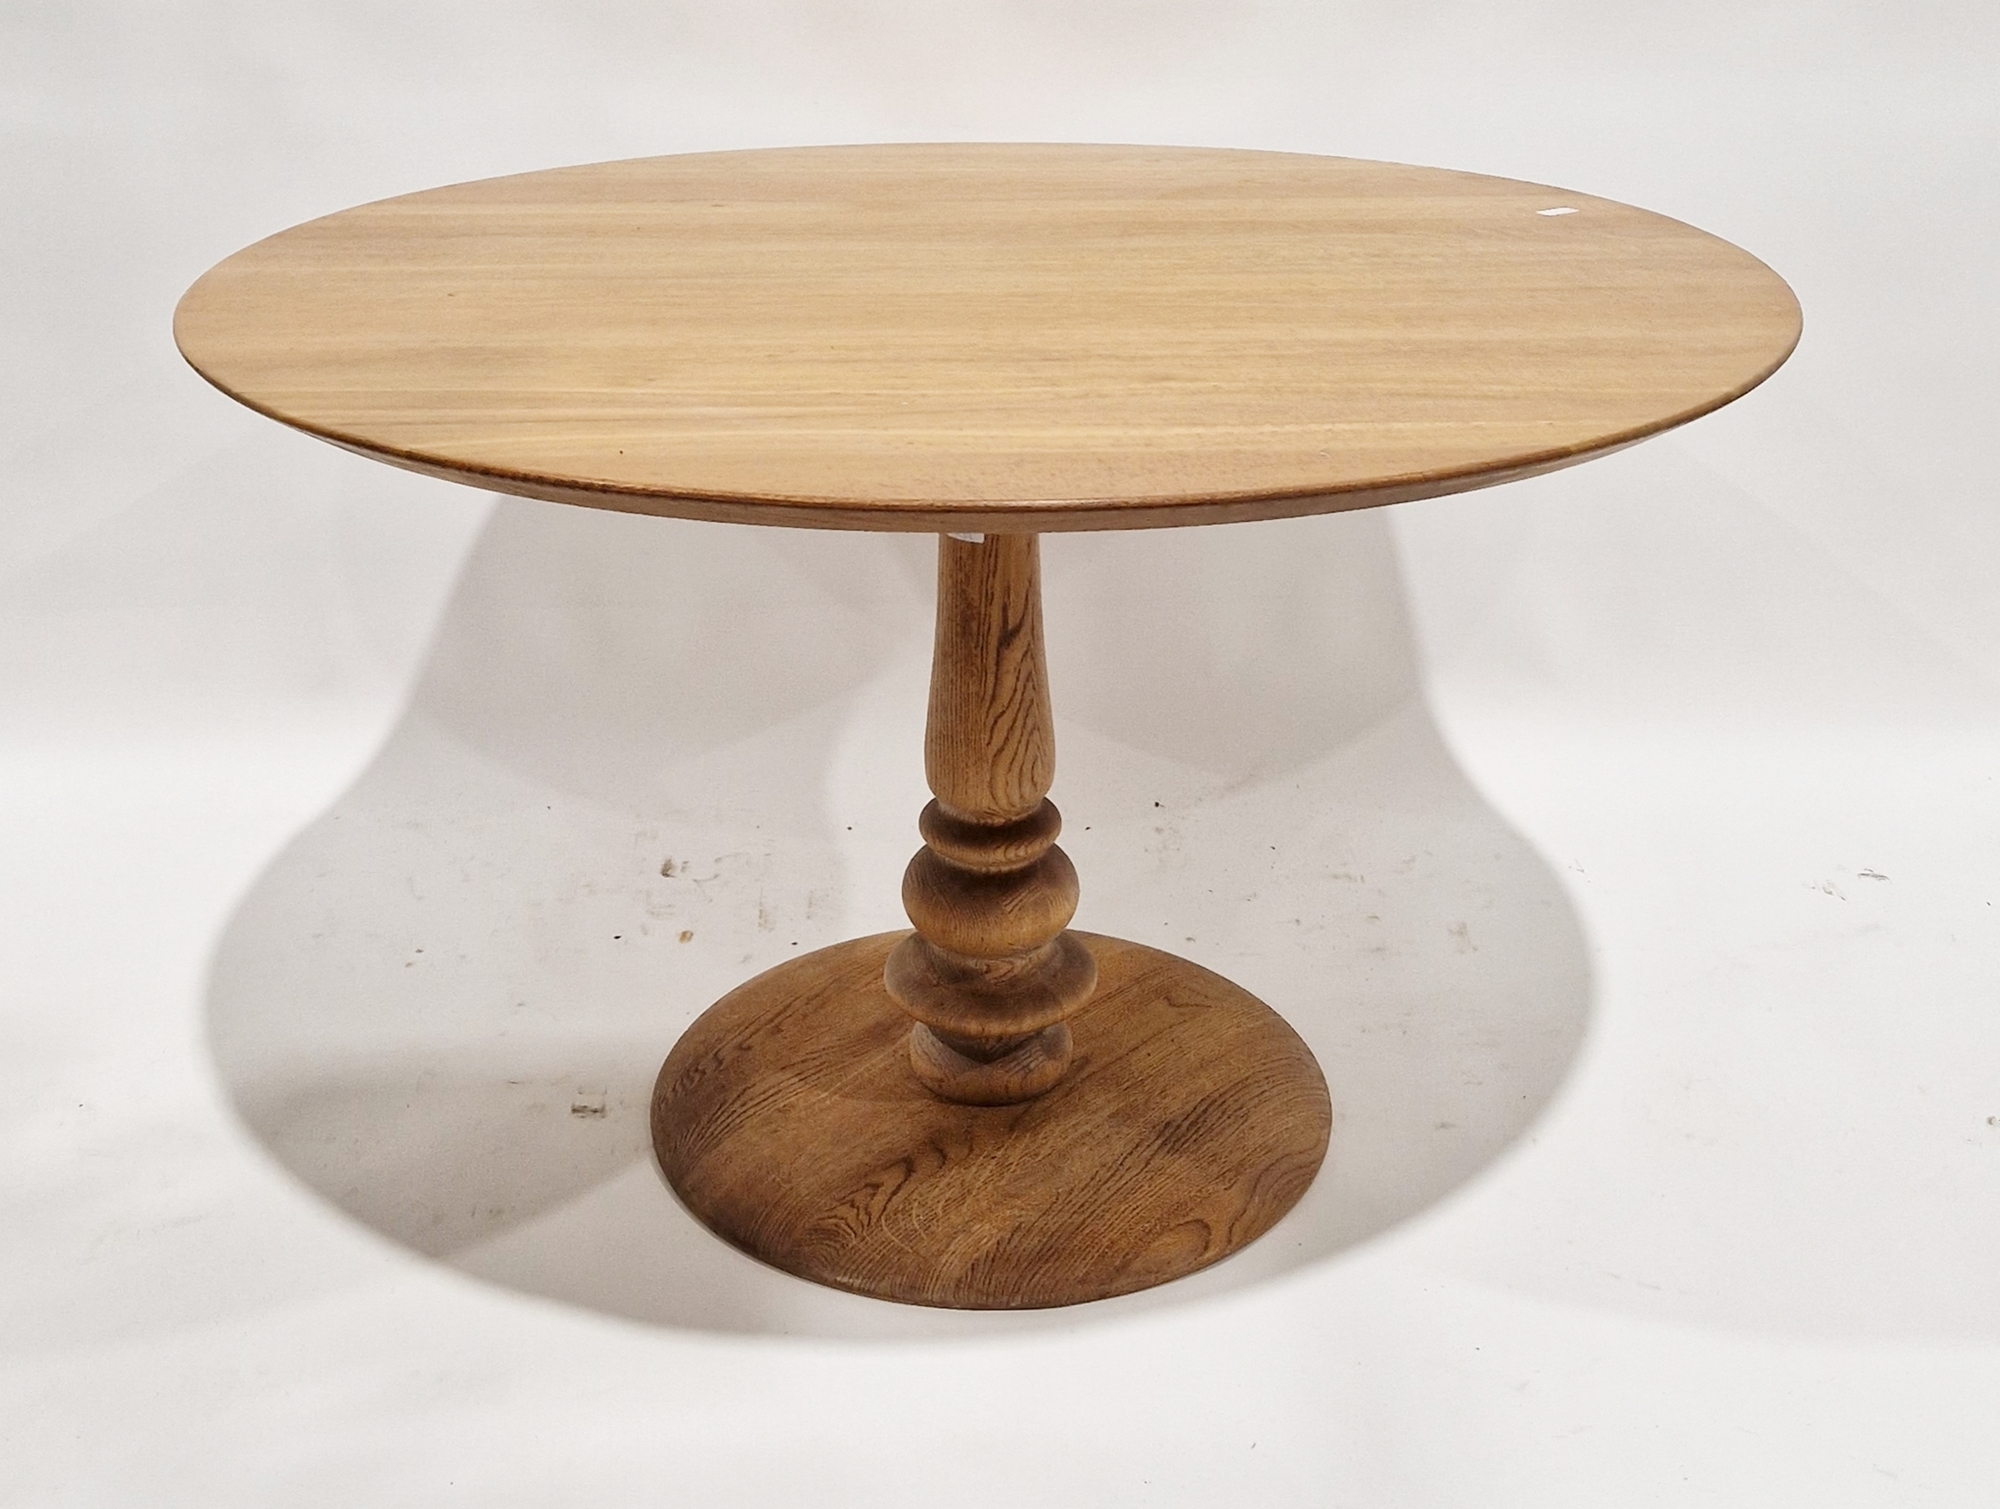 Light oak dining table of circular form, with turned column and circular foot, 73cm high x 121cm